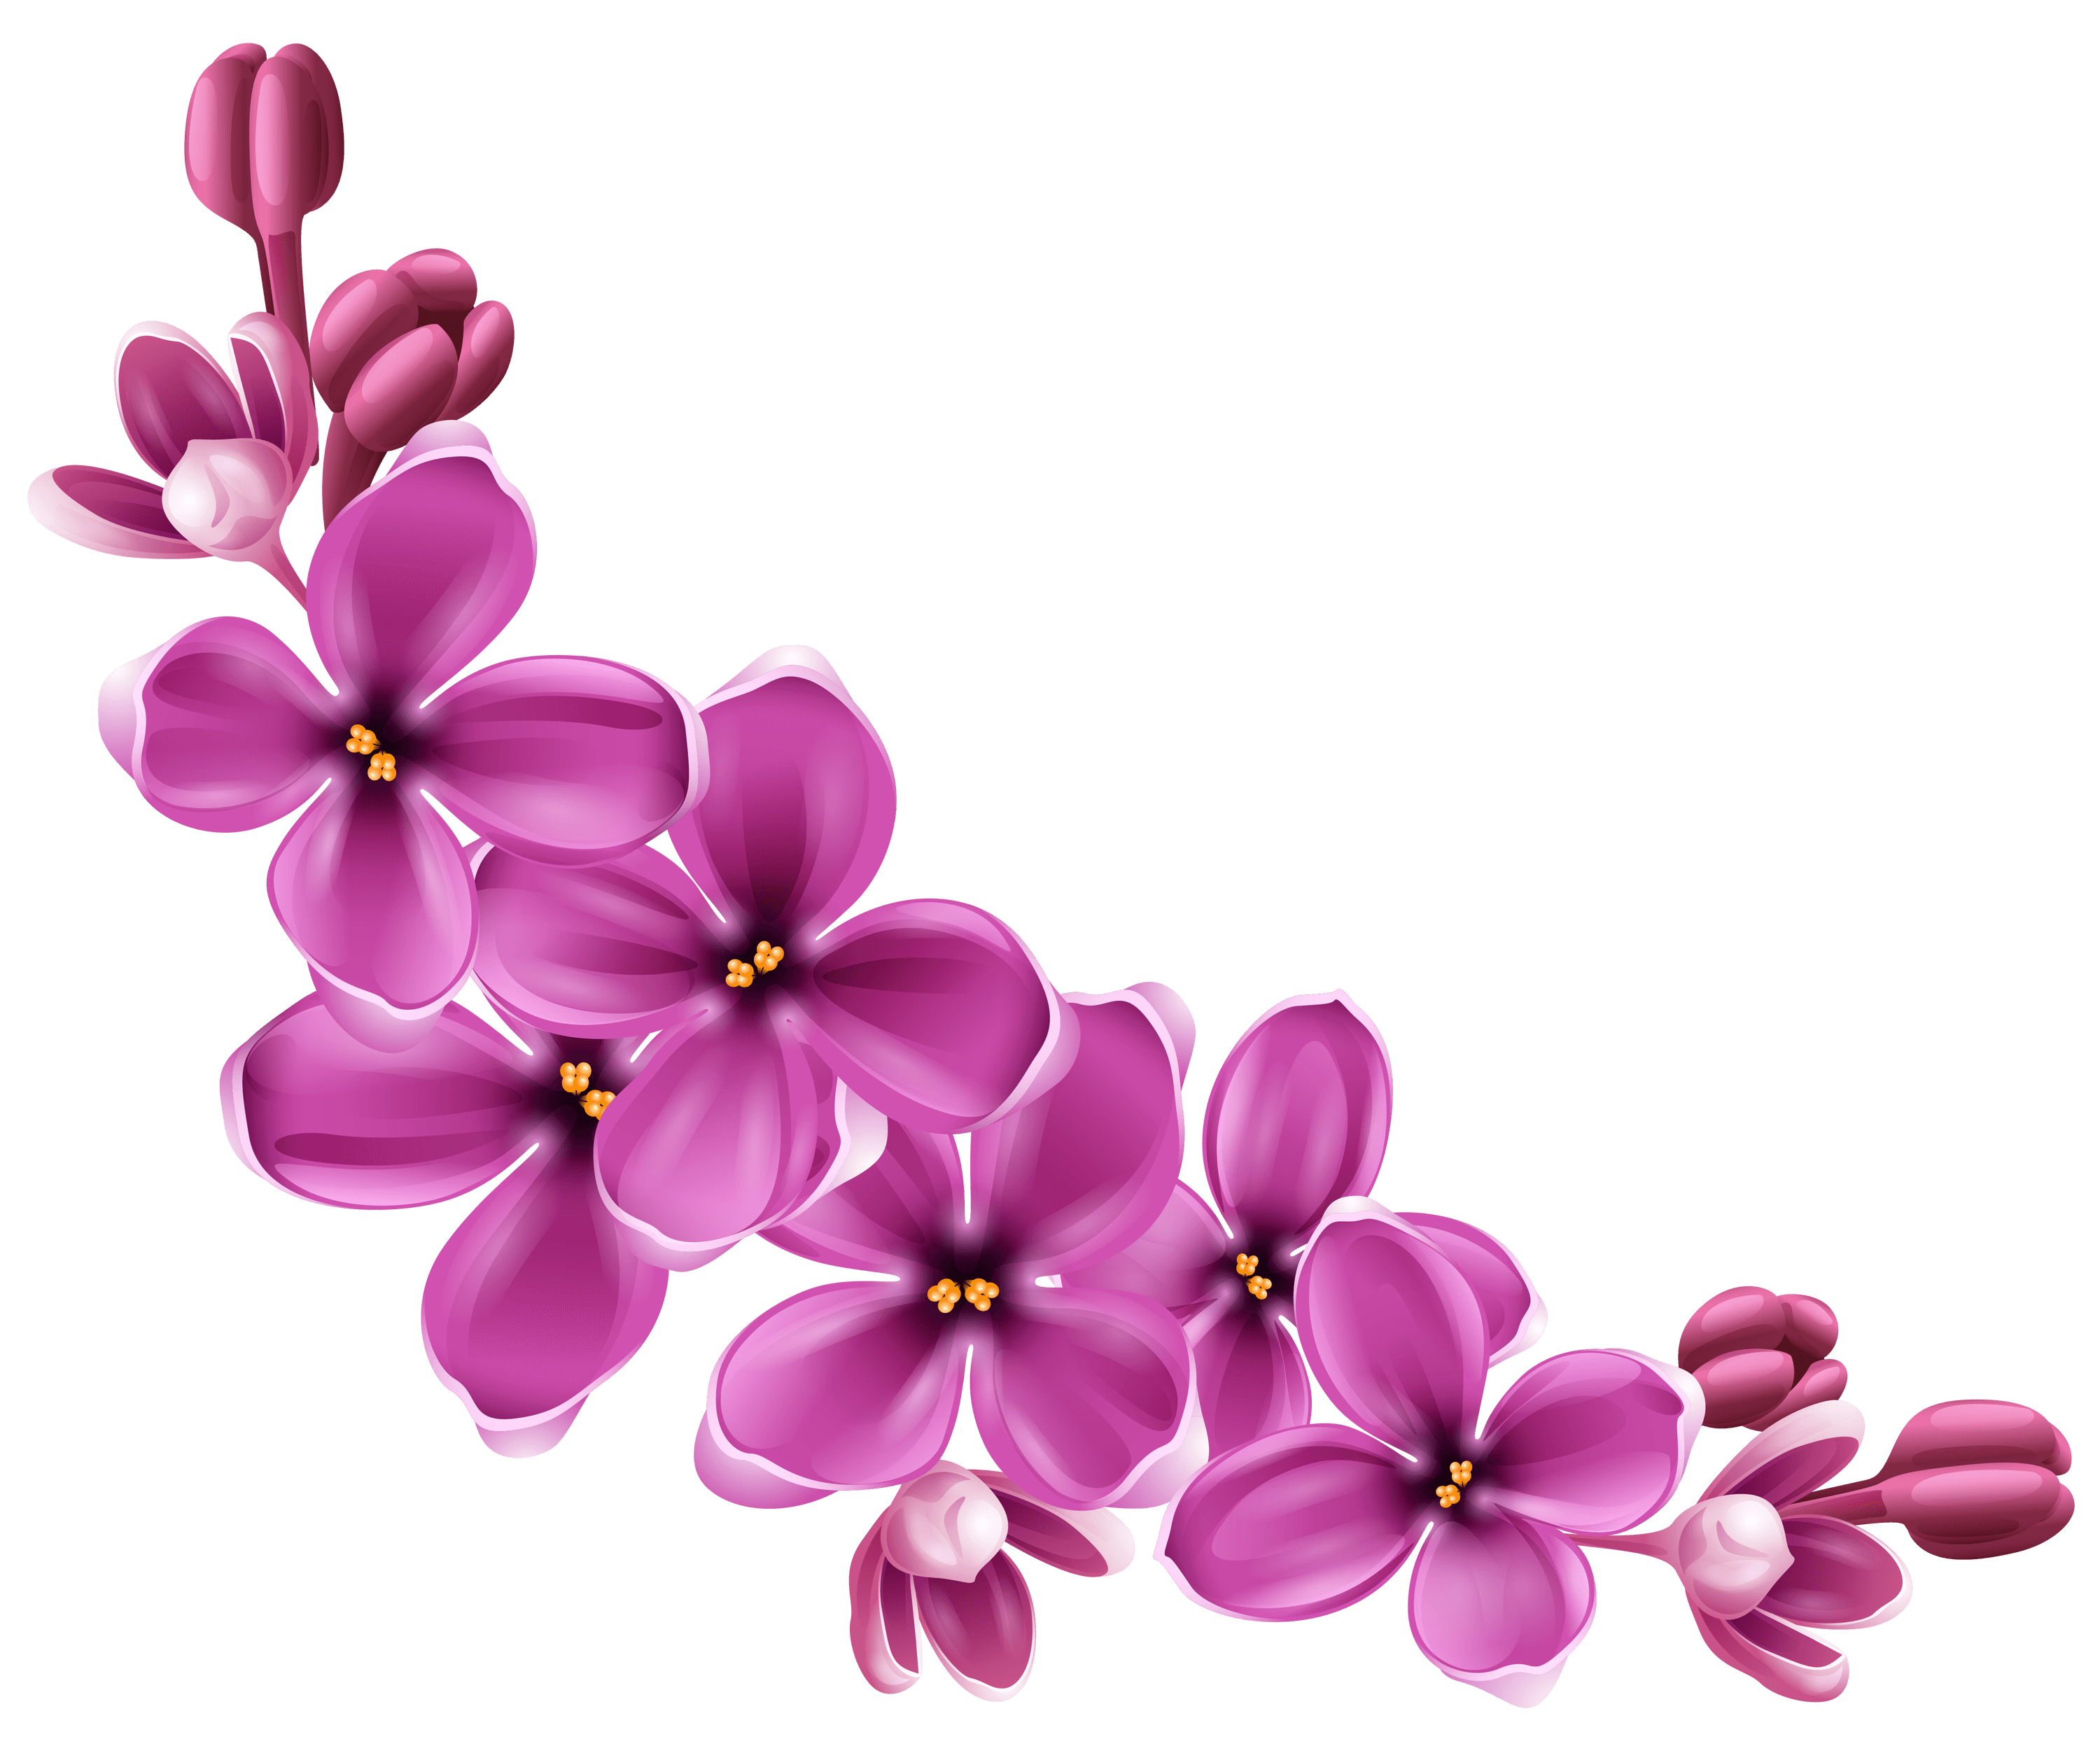 Purple And Pink Flowers PNG - 169862